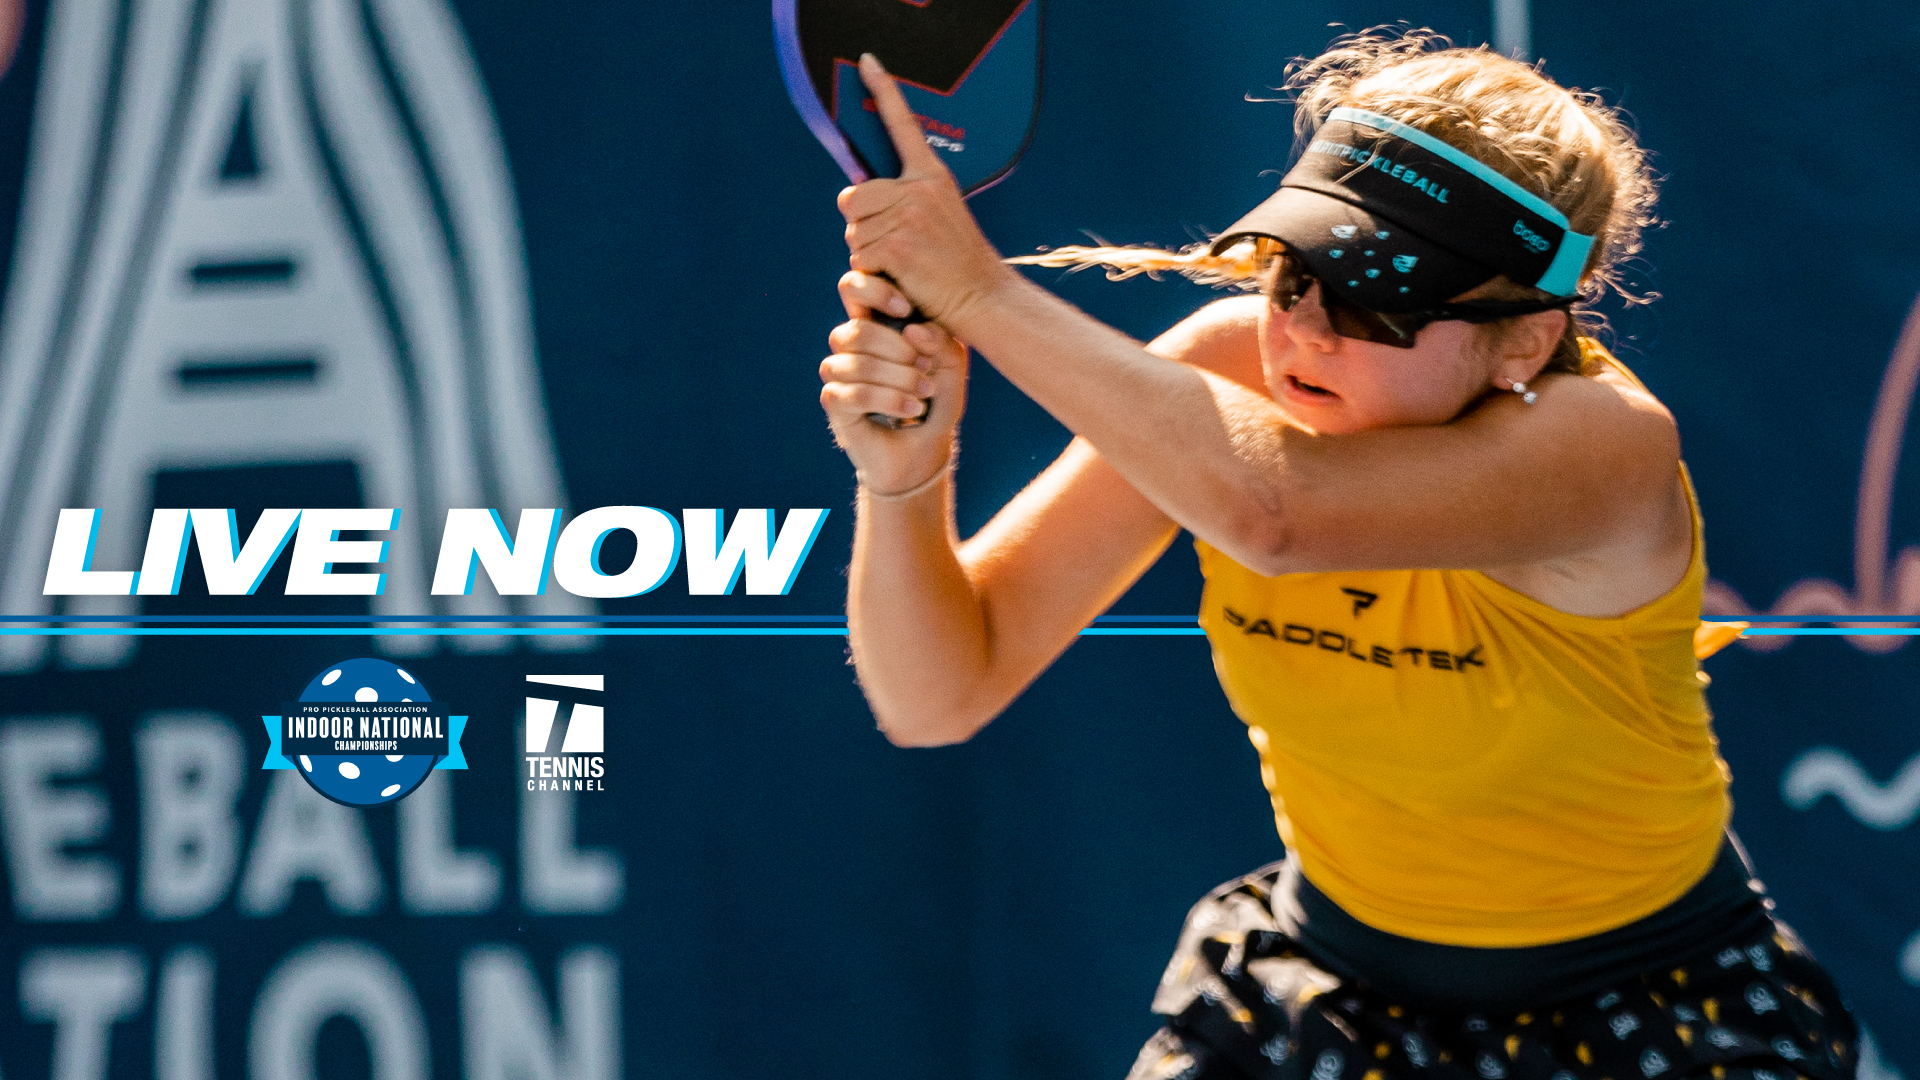 progressief Ga naar beneden Creatie Tennis Channel on Twitter: "It's time for the Ororo Indoor National  Championships! 🙌 @PPAtour players including Anna Leigh Waters take the  court today! Stream live → https://t.co/tPoe44C26q #ppatour l #pickleball  https://t.co/5uYUCRQXoT" /